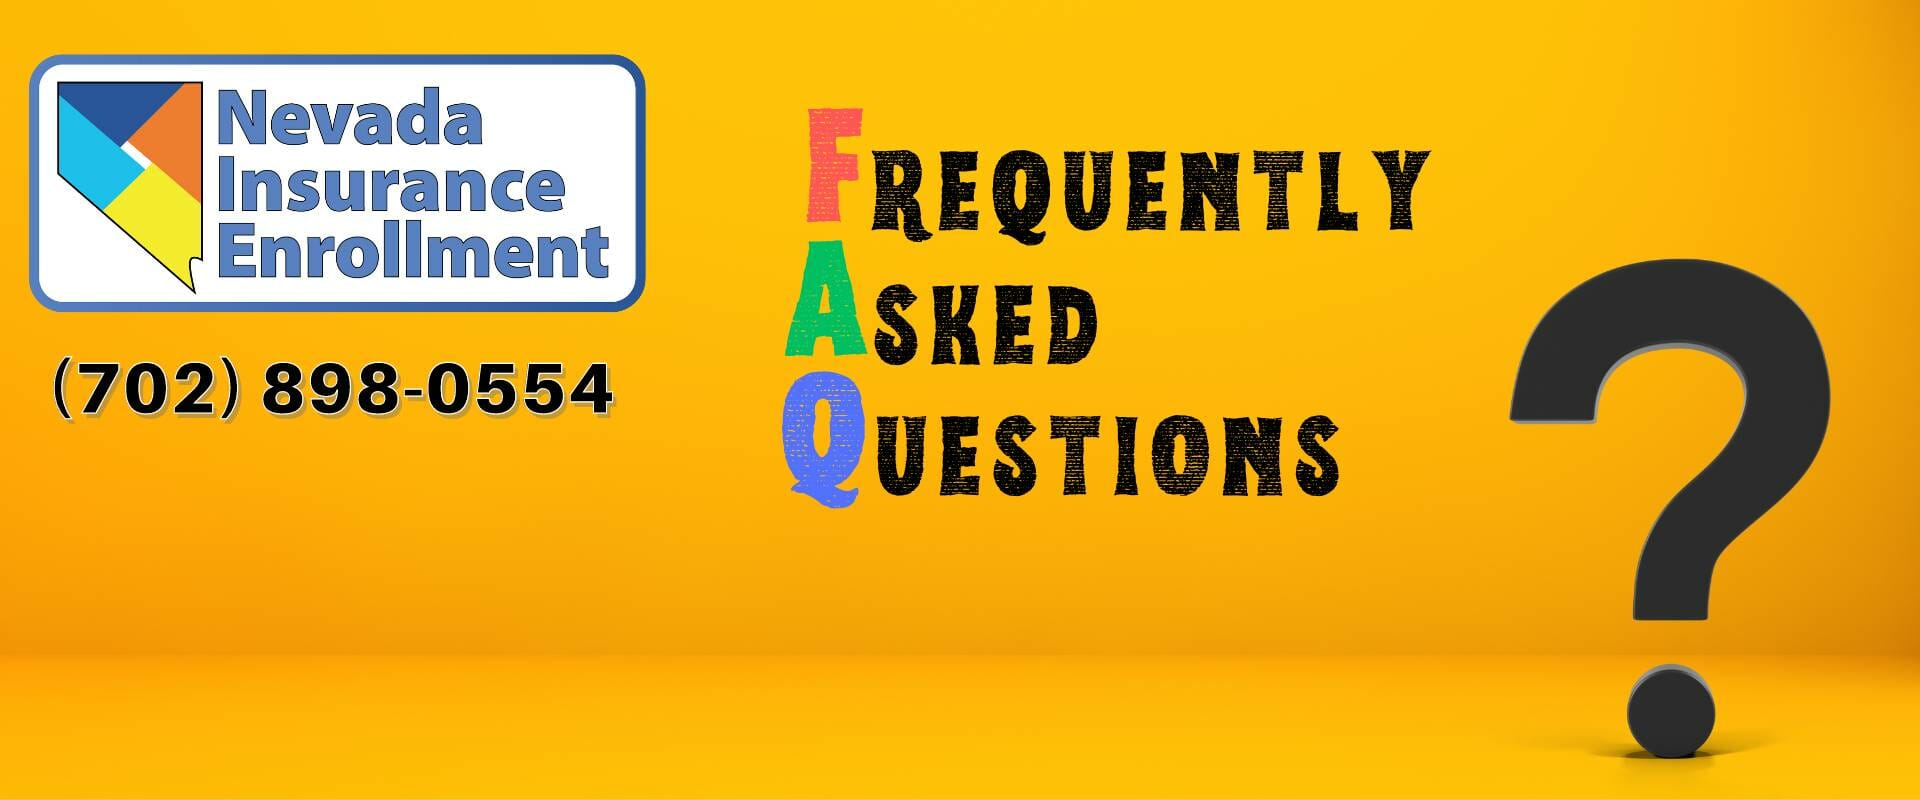 Frequently Asked Questions - MAIN page image